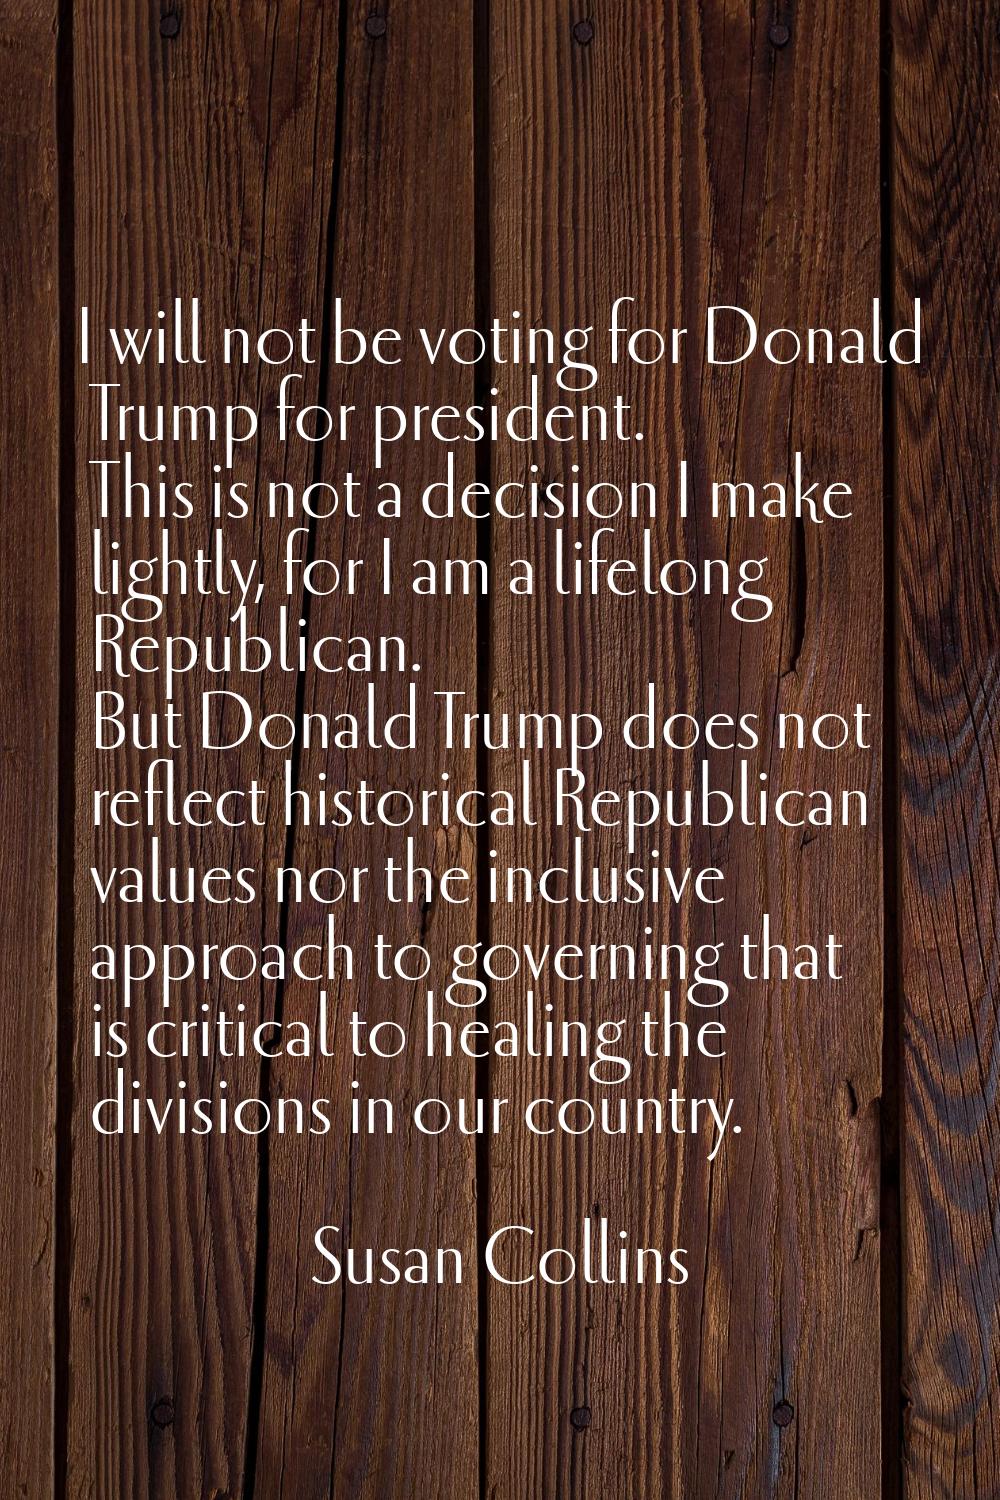 I will not be voting for Donald Trump for president. This is not a decision I make lightly, for I a